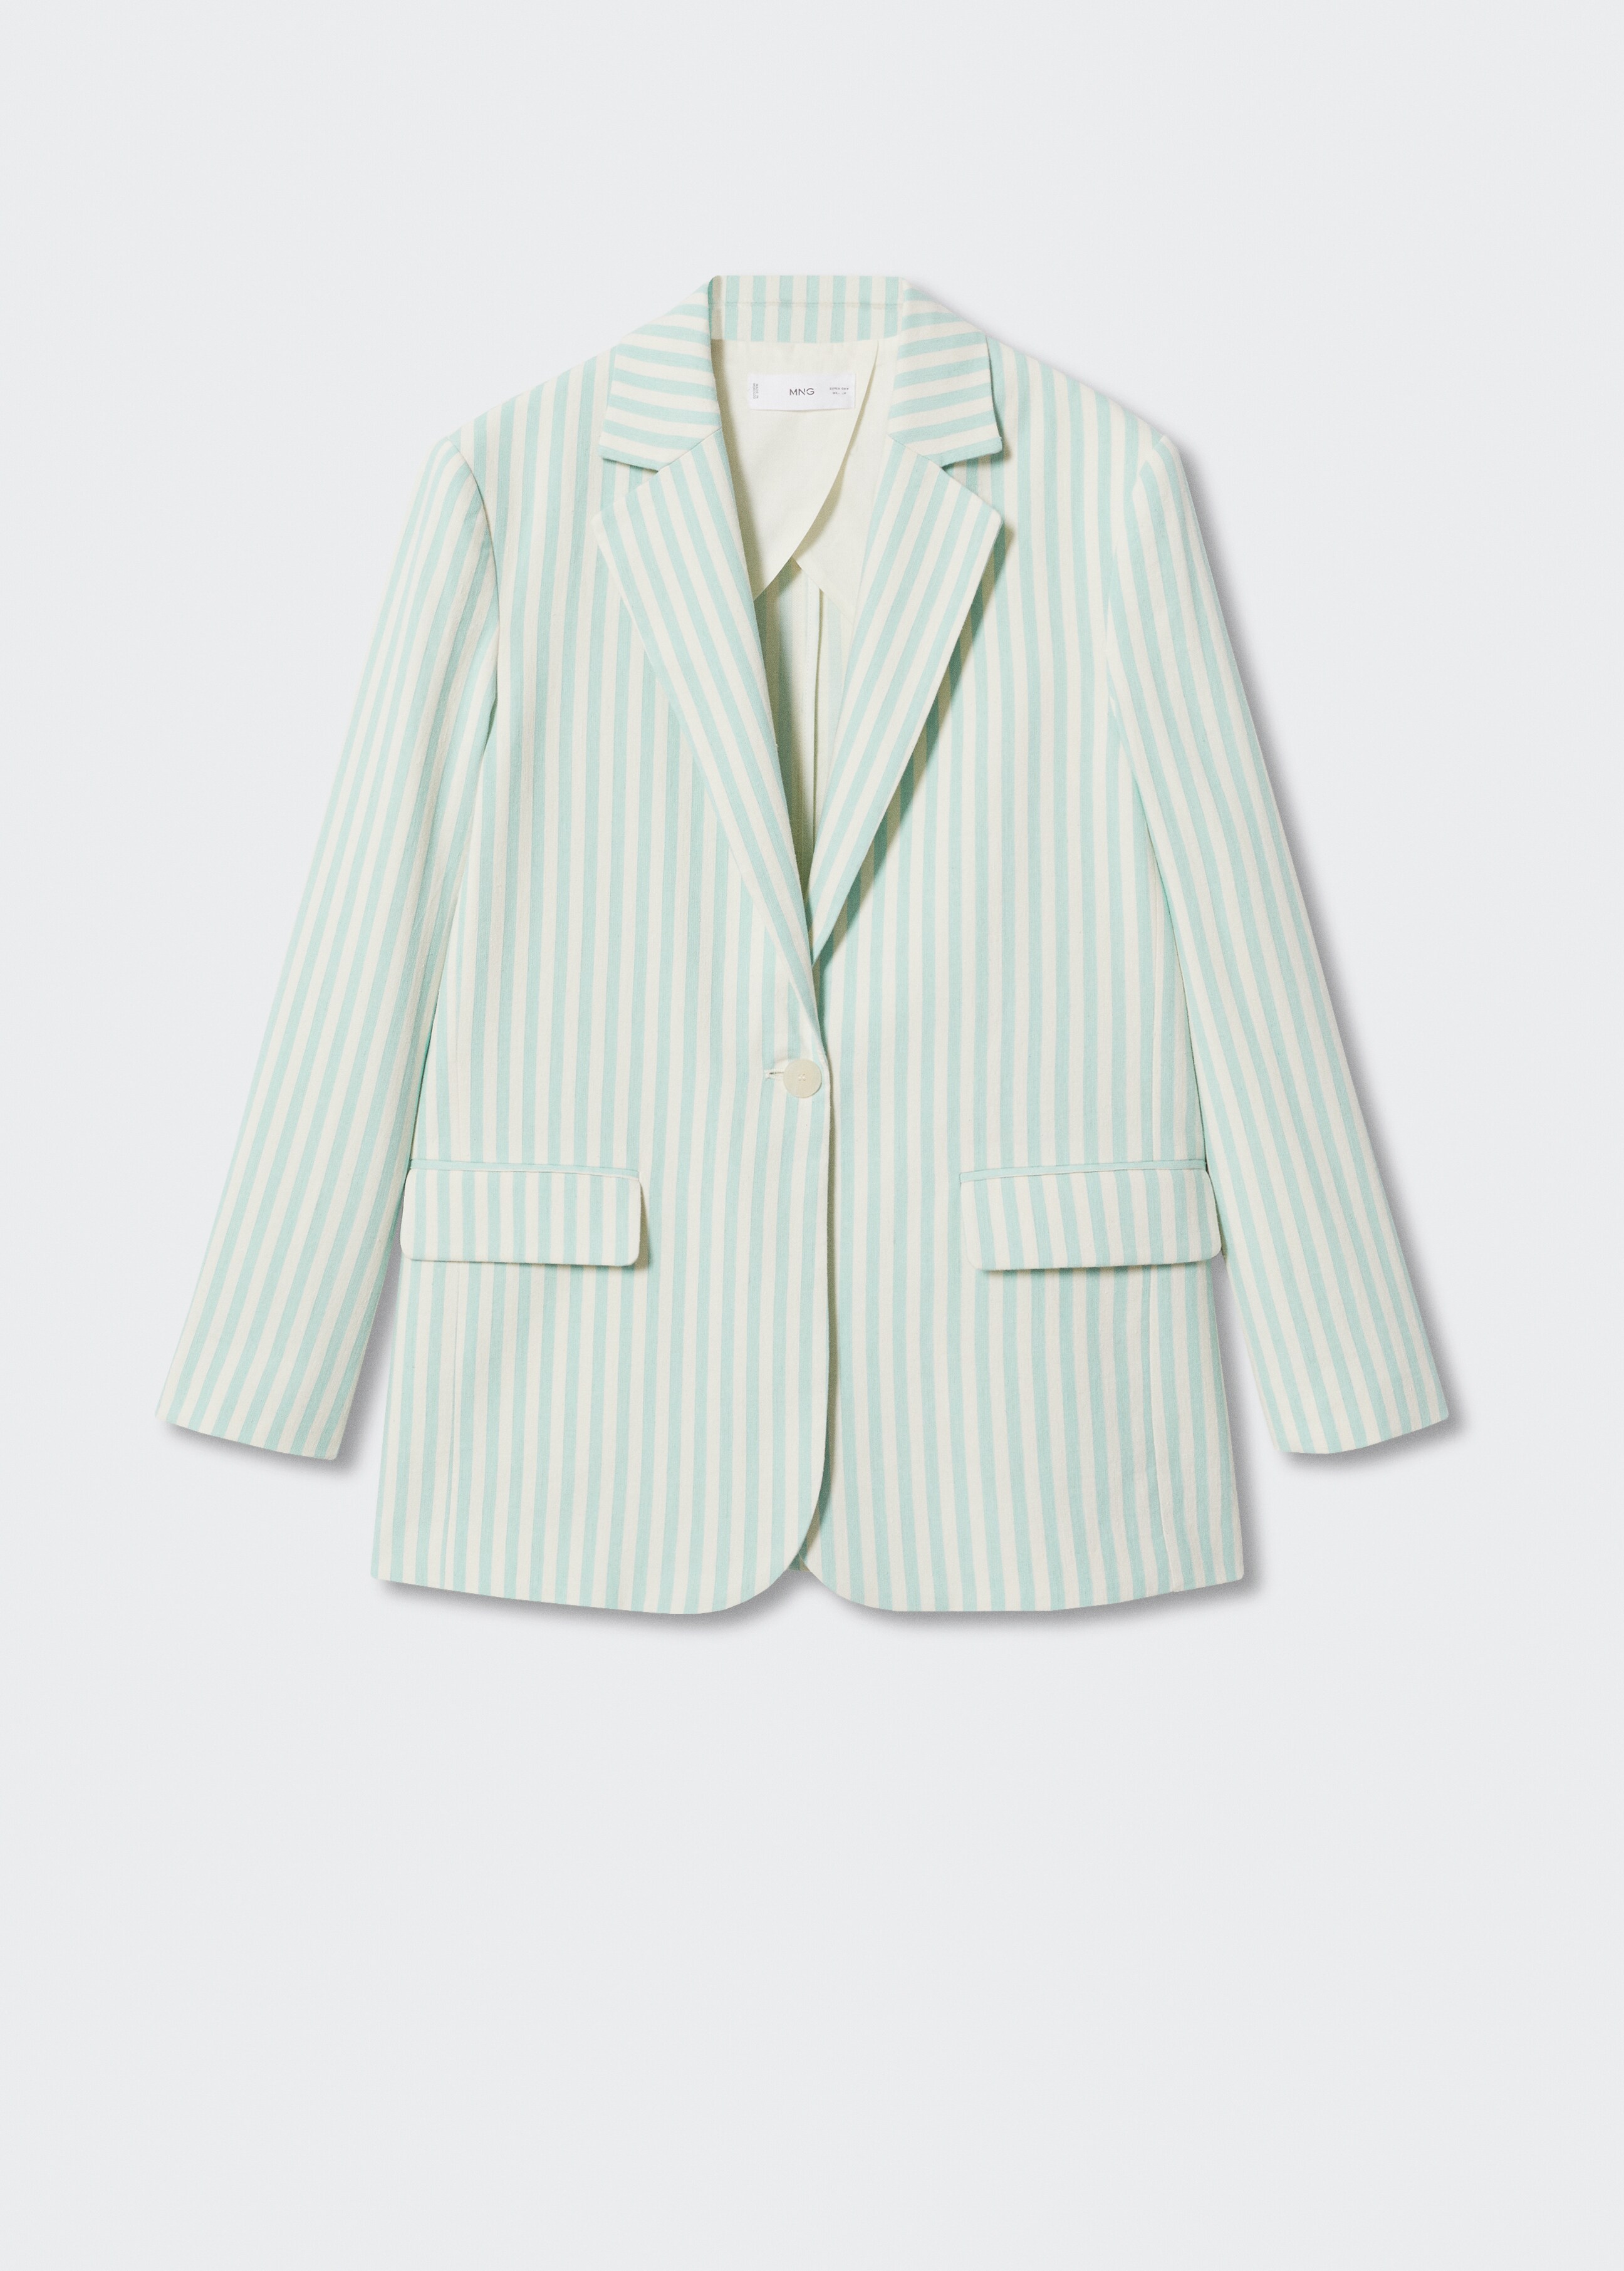 Striped suit blazer - Article without model